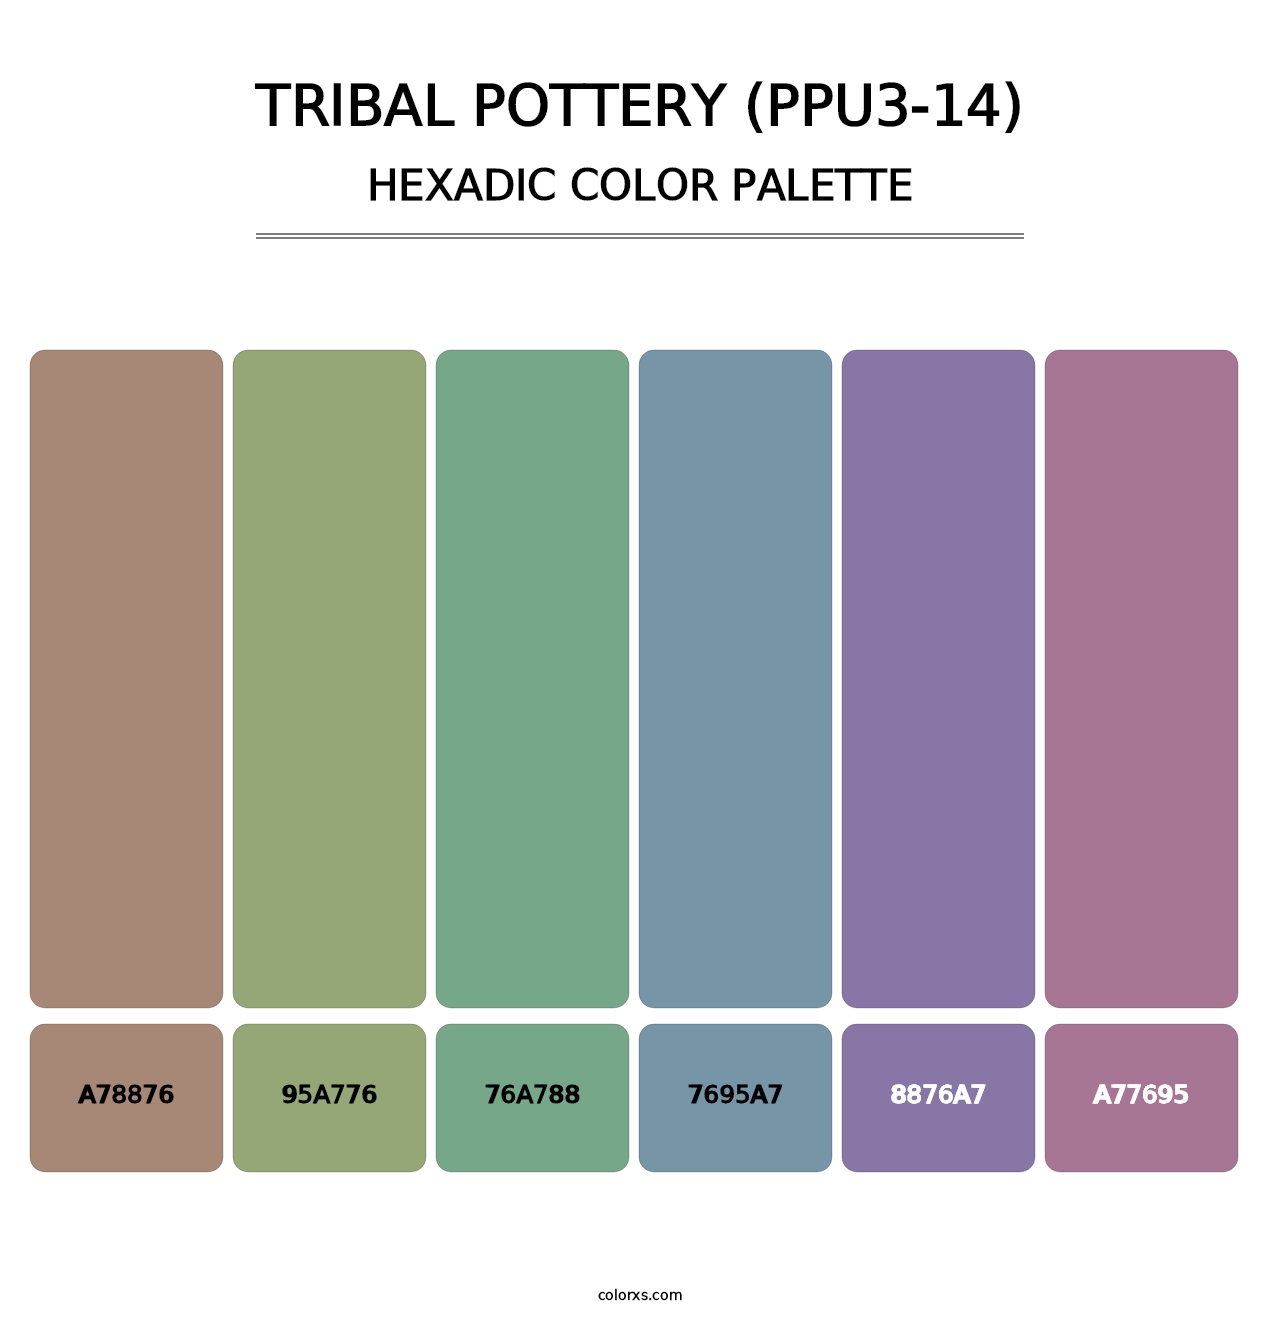 Tribal Pottery (PPU3-14) - Hexadic Color Palette